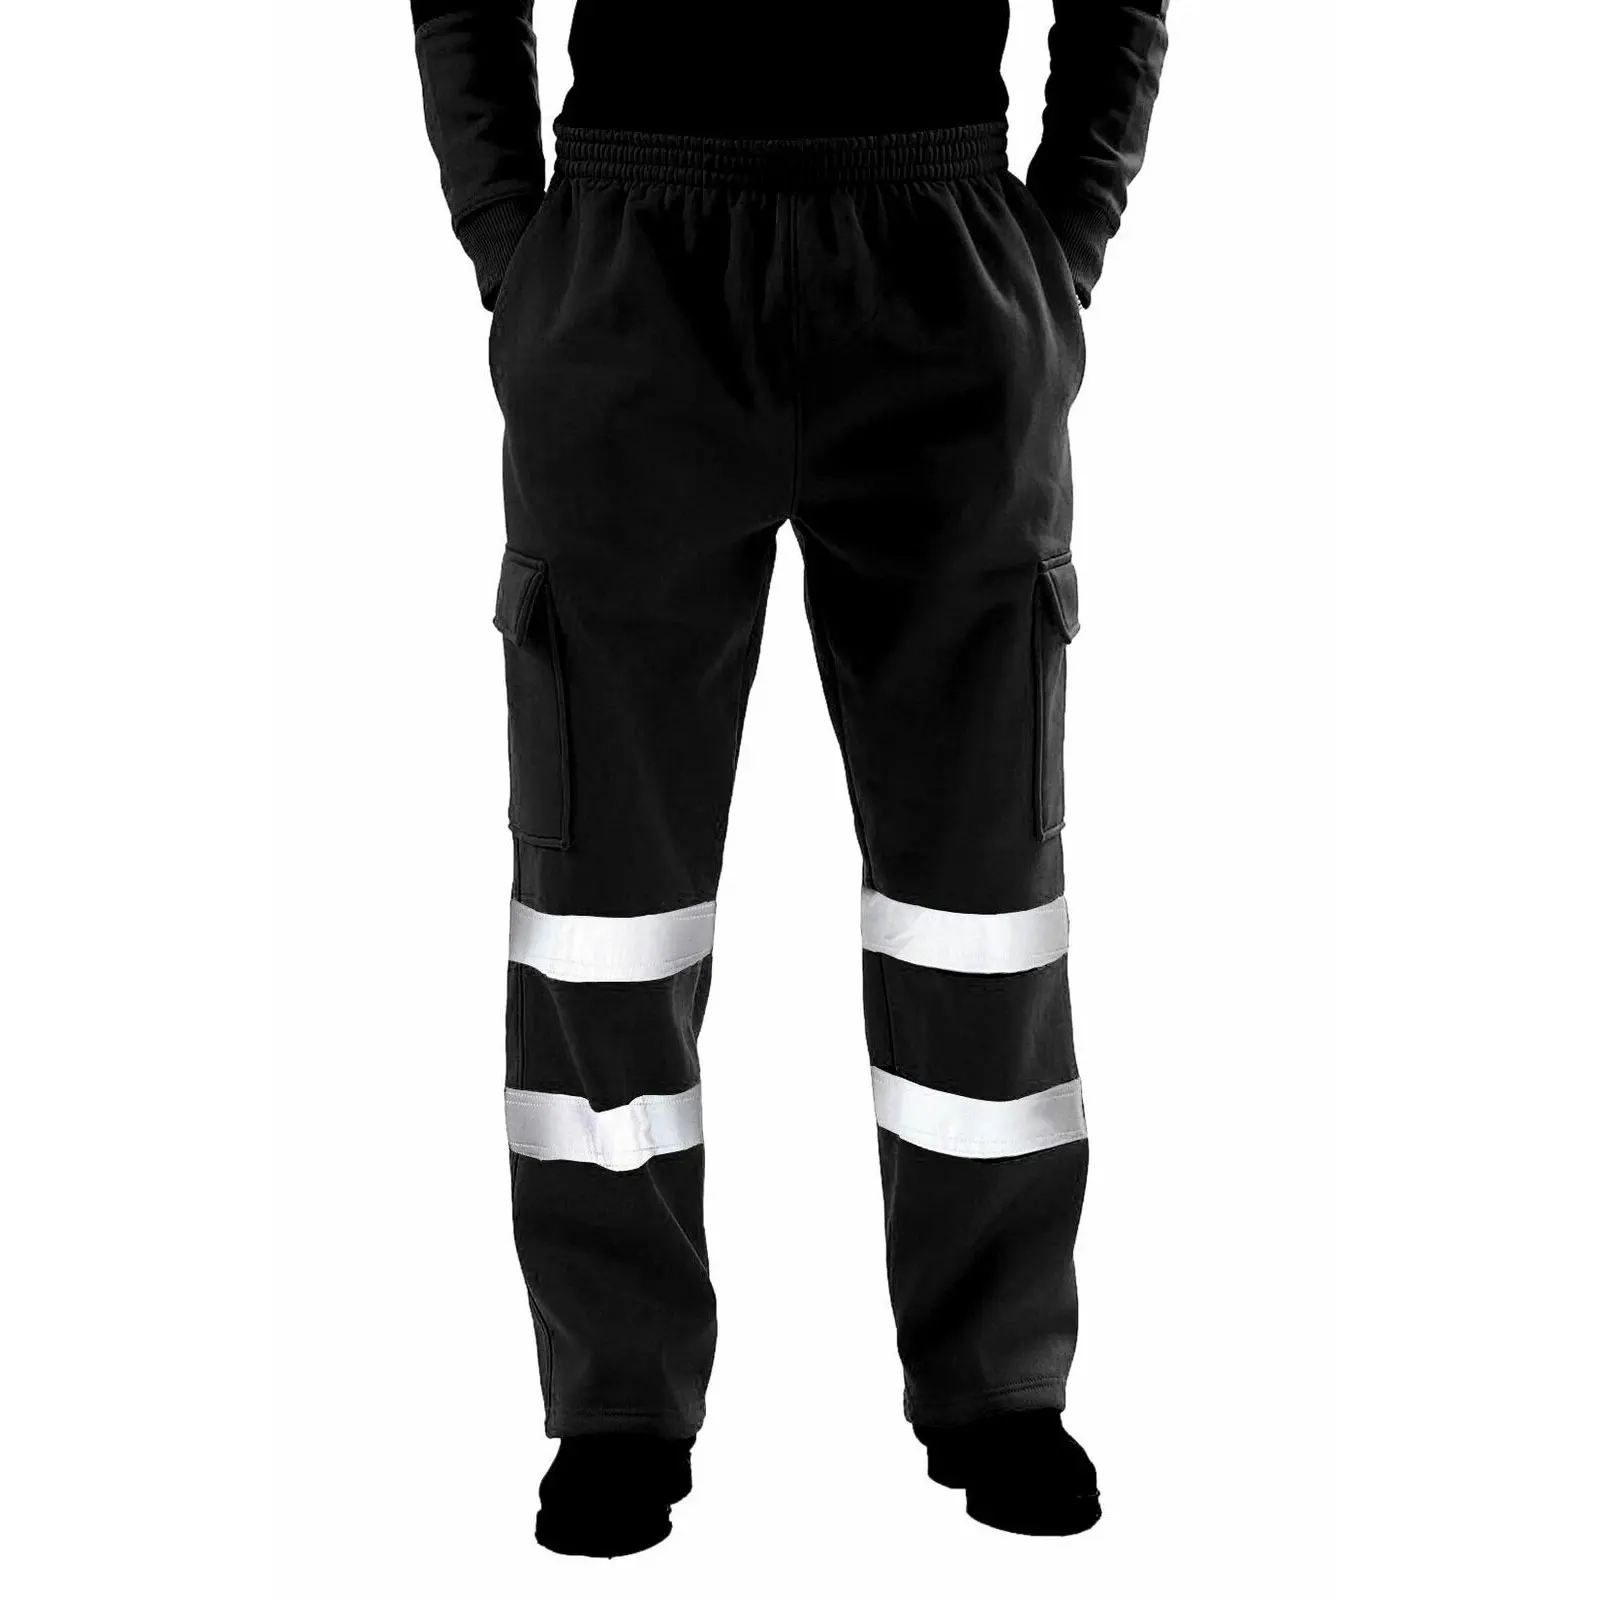 

Men's Pants Safety Rain Gear Reflective Stripes Solid Color Soft Pants for Office School Home Leisure Time